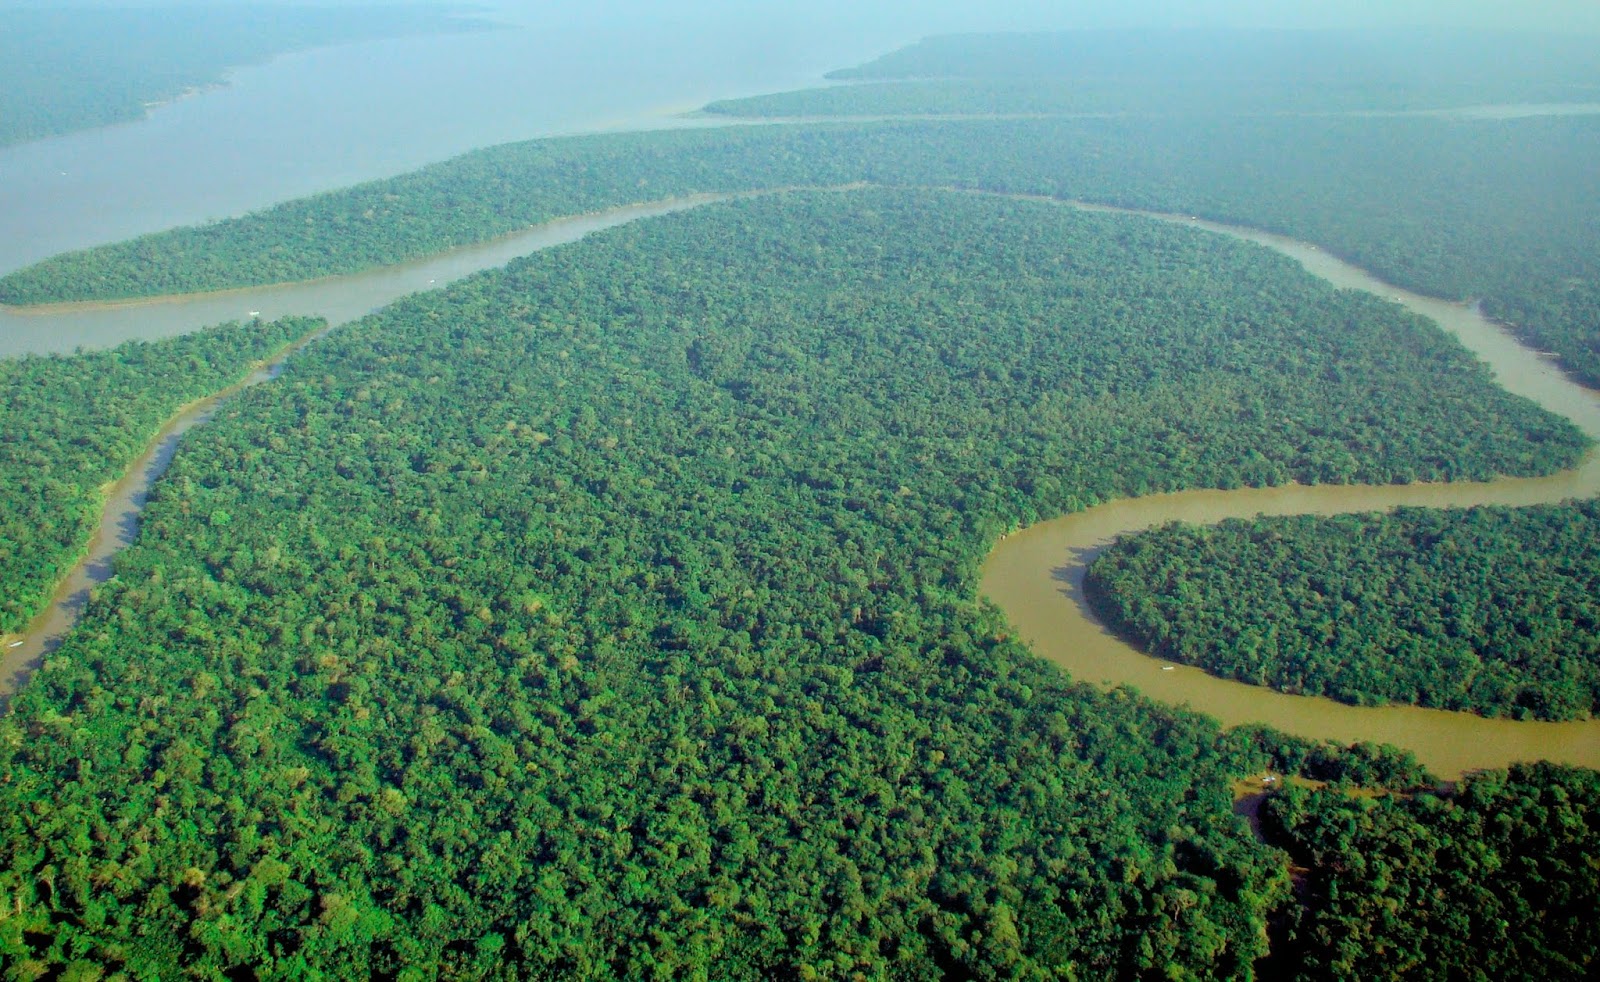 the Amazon, though not the one we're talking about in the article